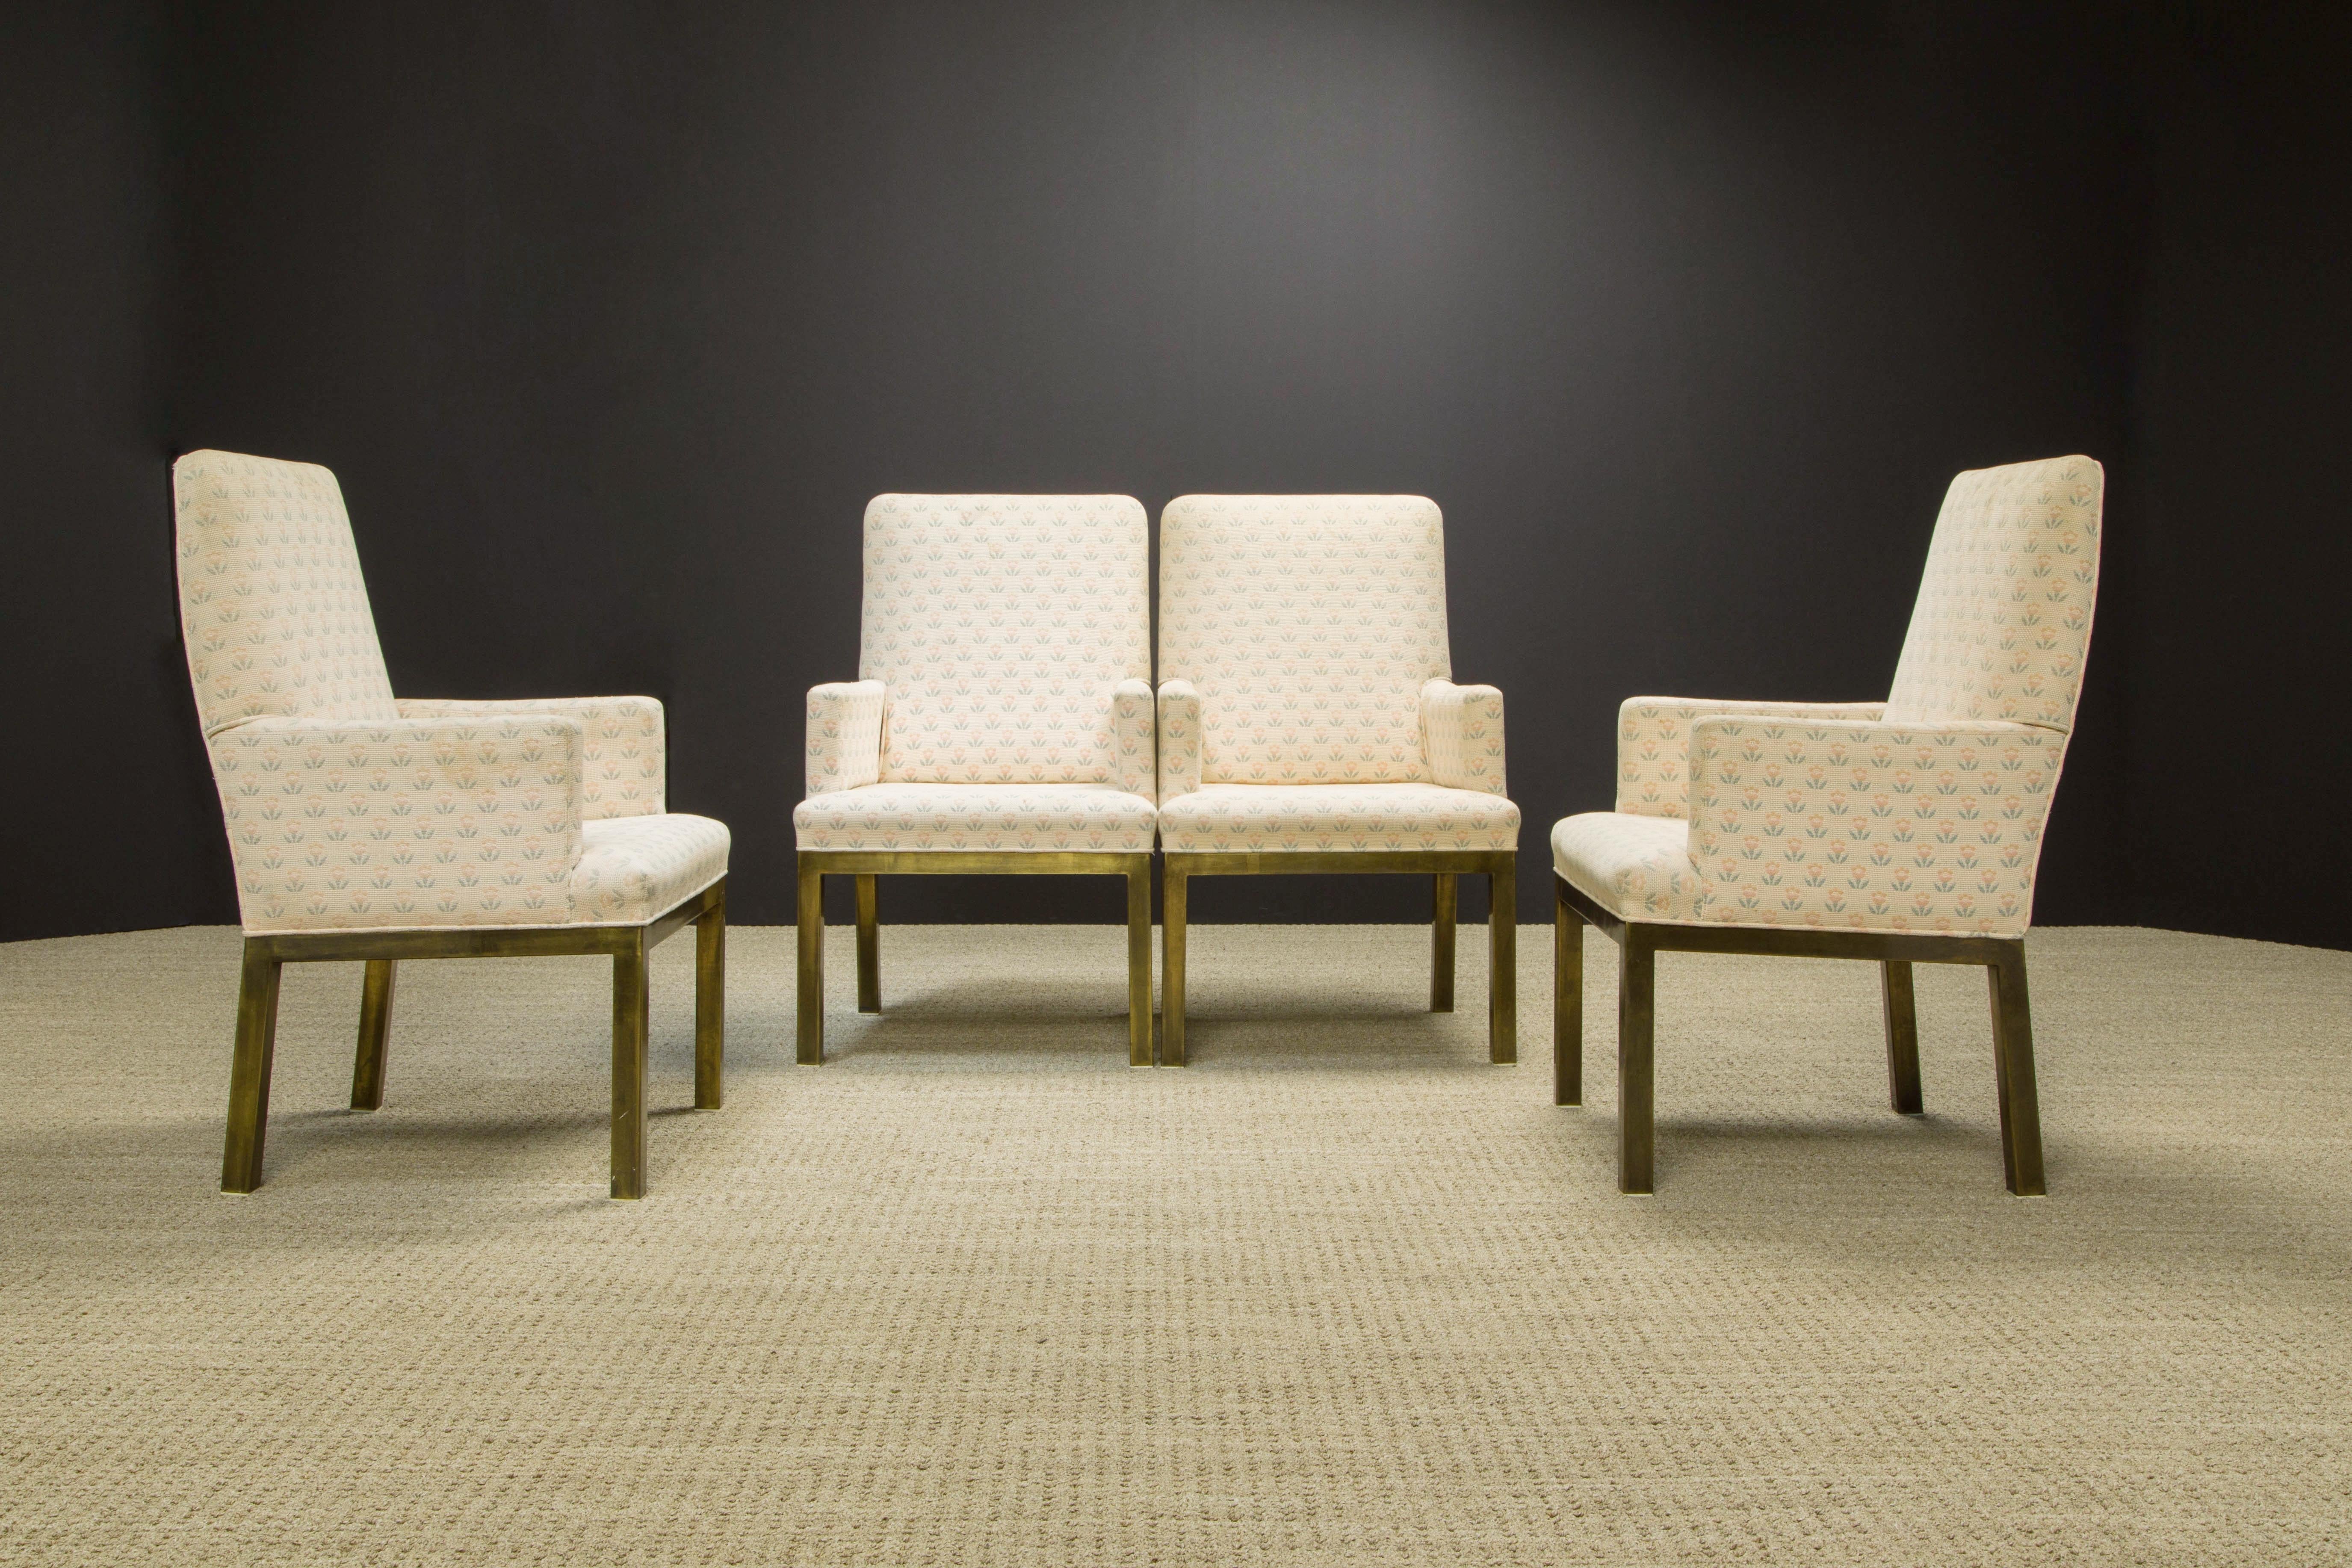 This super cute set of four (4) dining armchairs by Mastercraft feature a brass base with light patina and a very unique and interesting fabric that features light pink and baby blue flowers over an off-white knit. The fabric resembles what I would